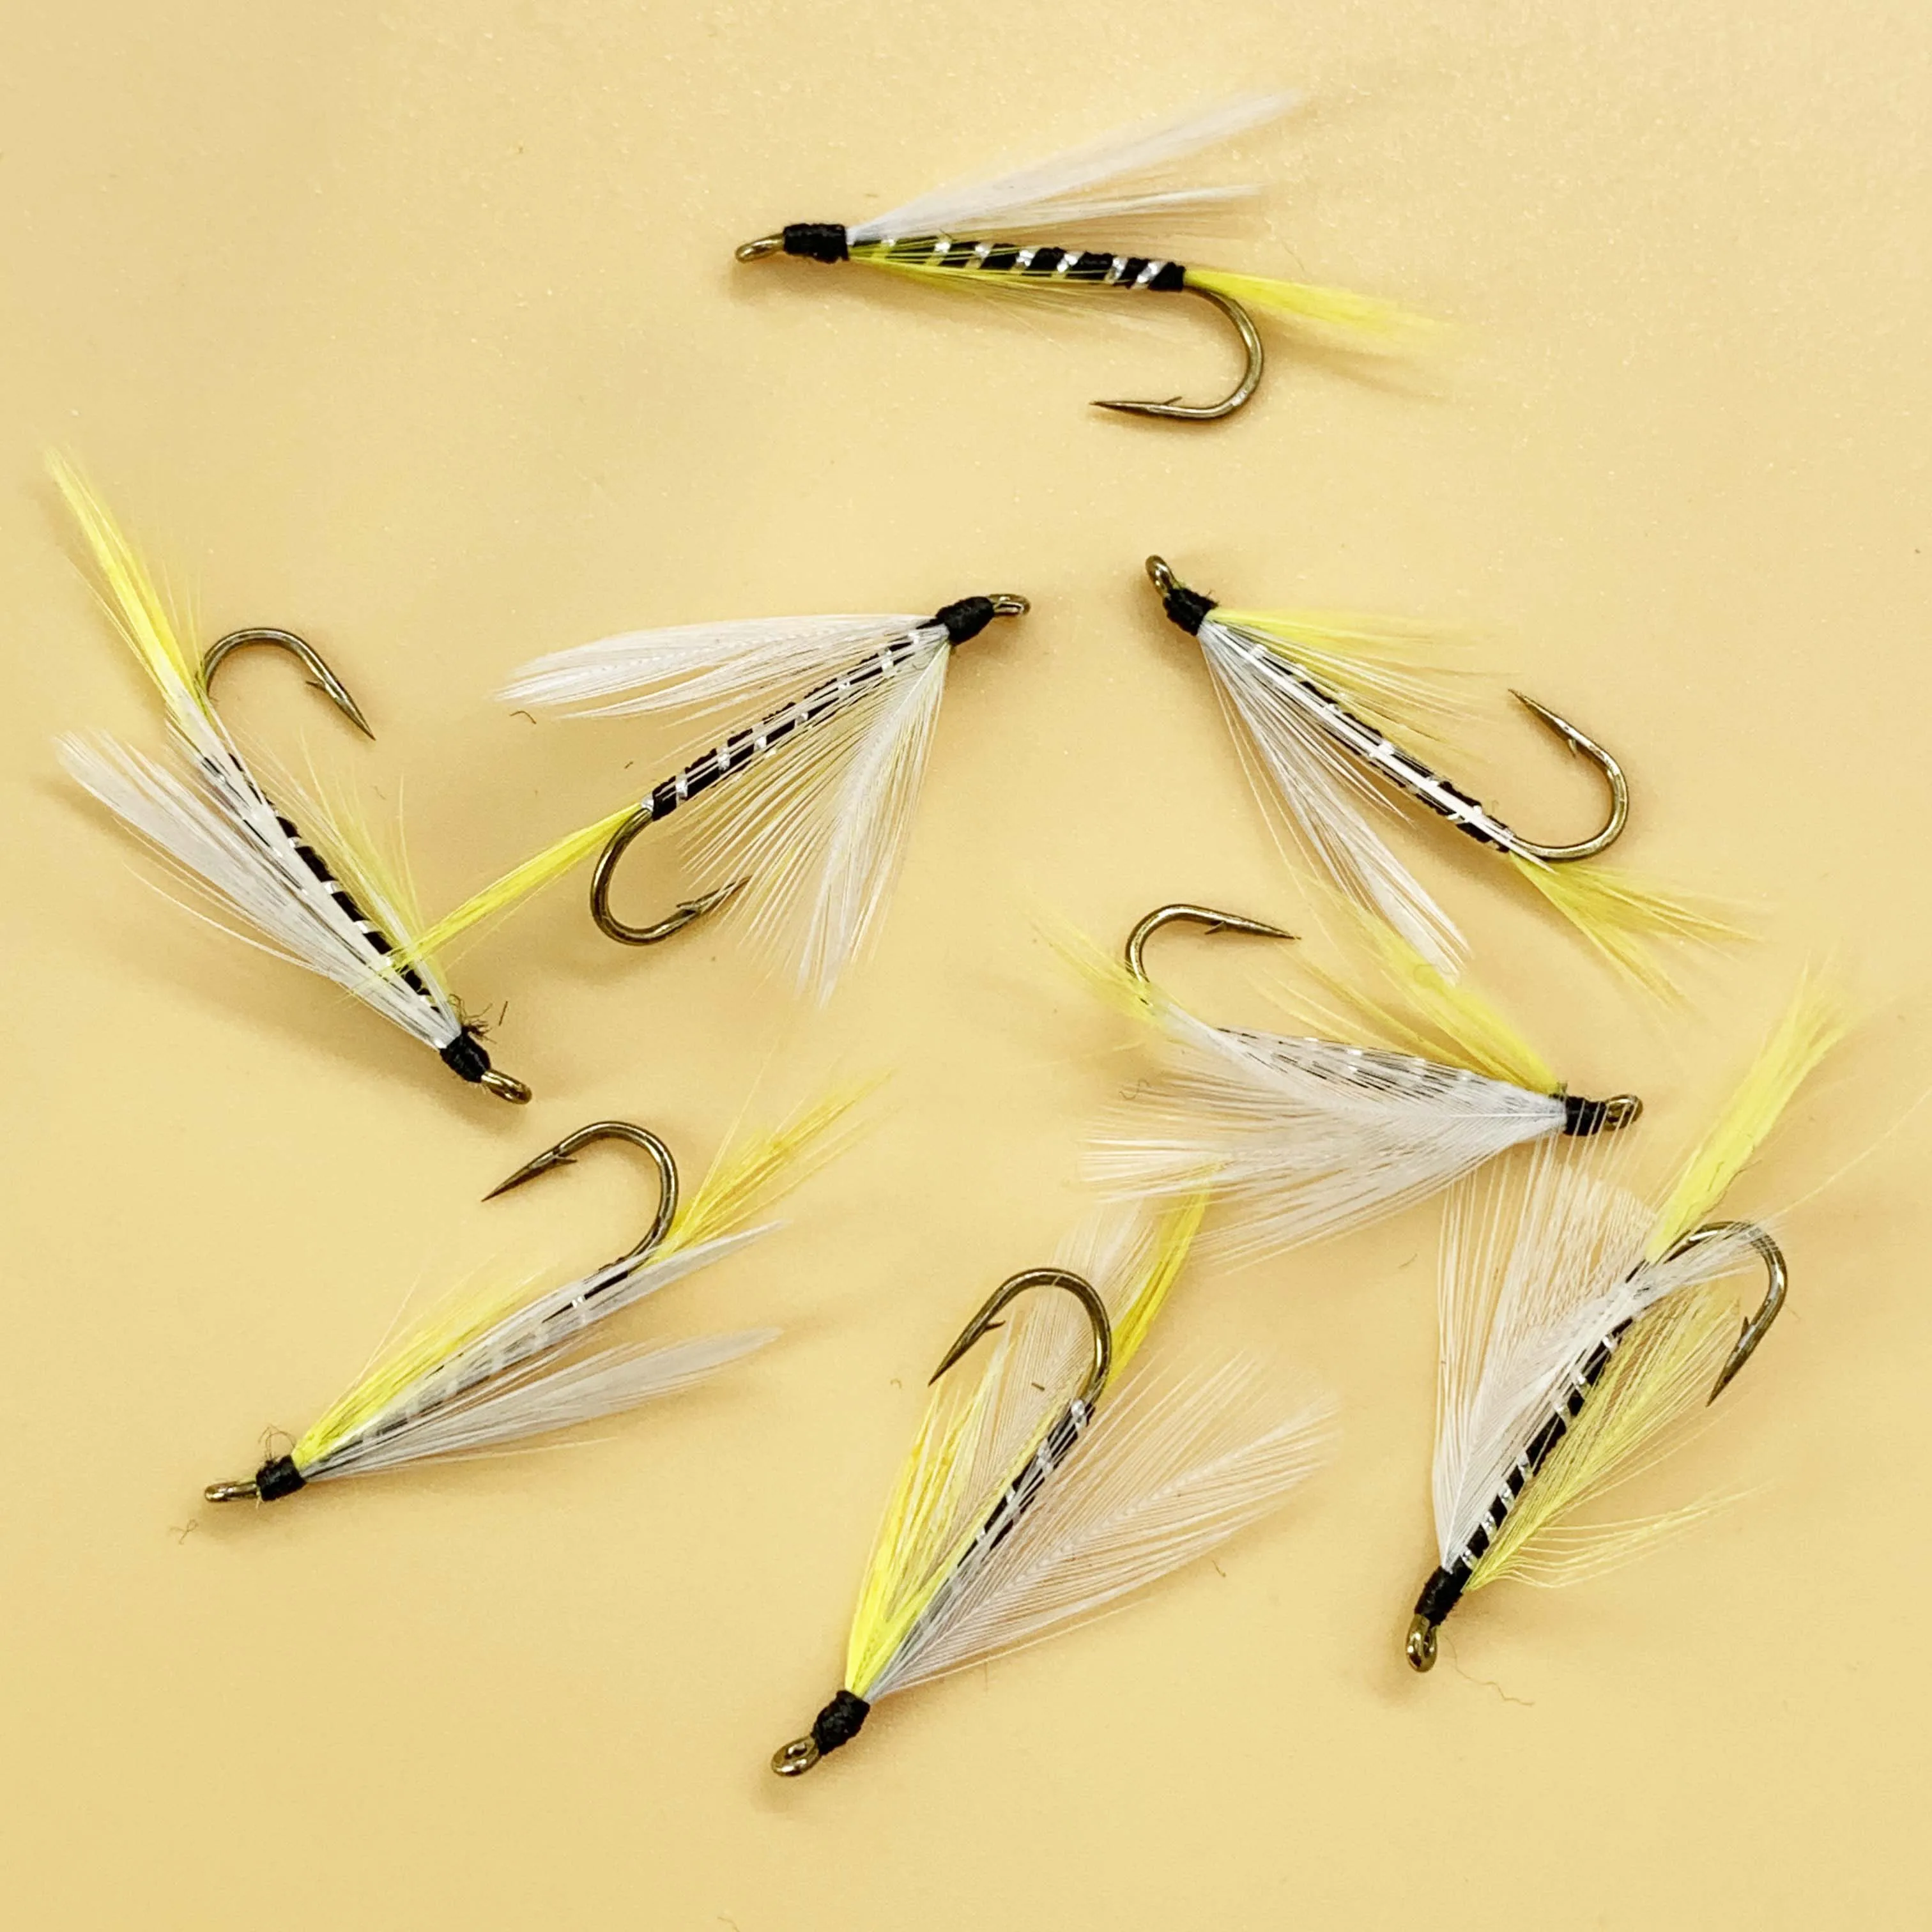 https://ae01.alicdn.com/kf/H5313d8b9e97e40bfa00751f269ae995fB/1-Piece-Fishing-Flies-Realistic-Nymph-Scud-Fly-for-Trout-Fly-Fishing-Streamer-Tying-Artificial-Lure.jpg